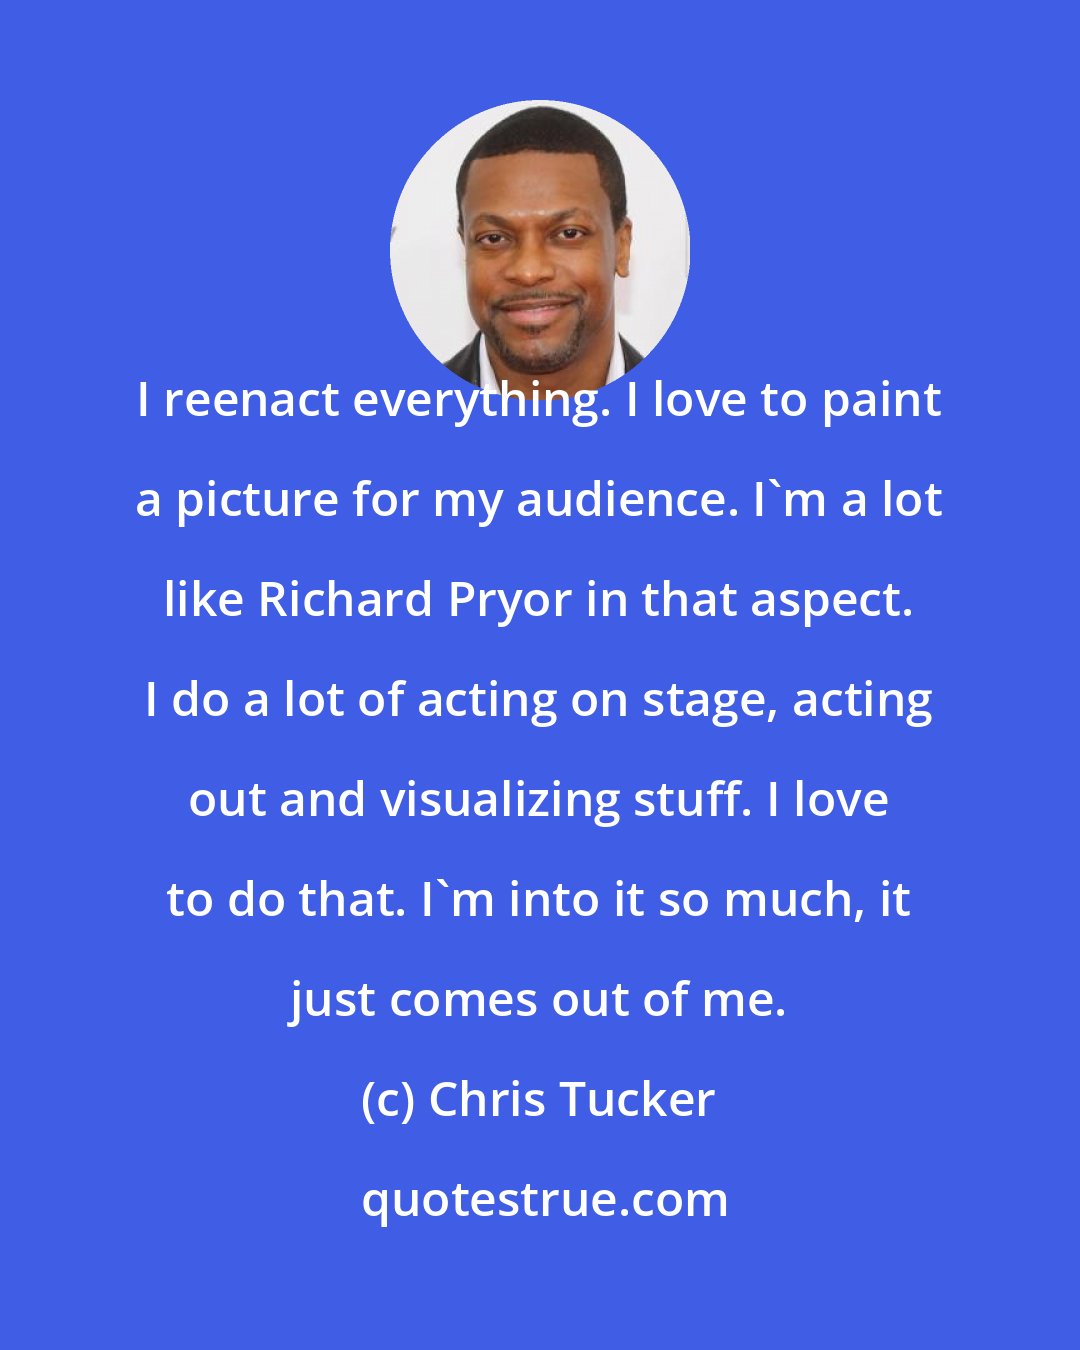 Chris Tucker: I reenact everything. I love to paint a picture for my audience. I'm a lot like Richard Pryor in that aspect. I do a lot of acting on stage, acting out and visualizing stuff. I love to do that. I'm into it so much, it just comes out of me.